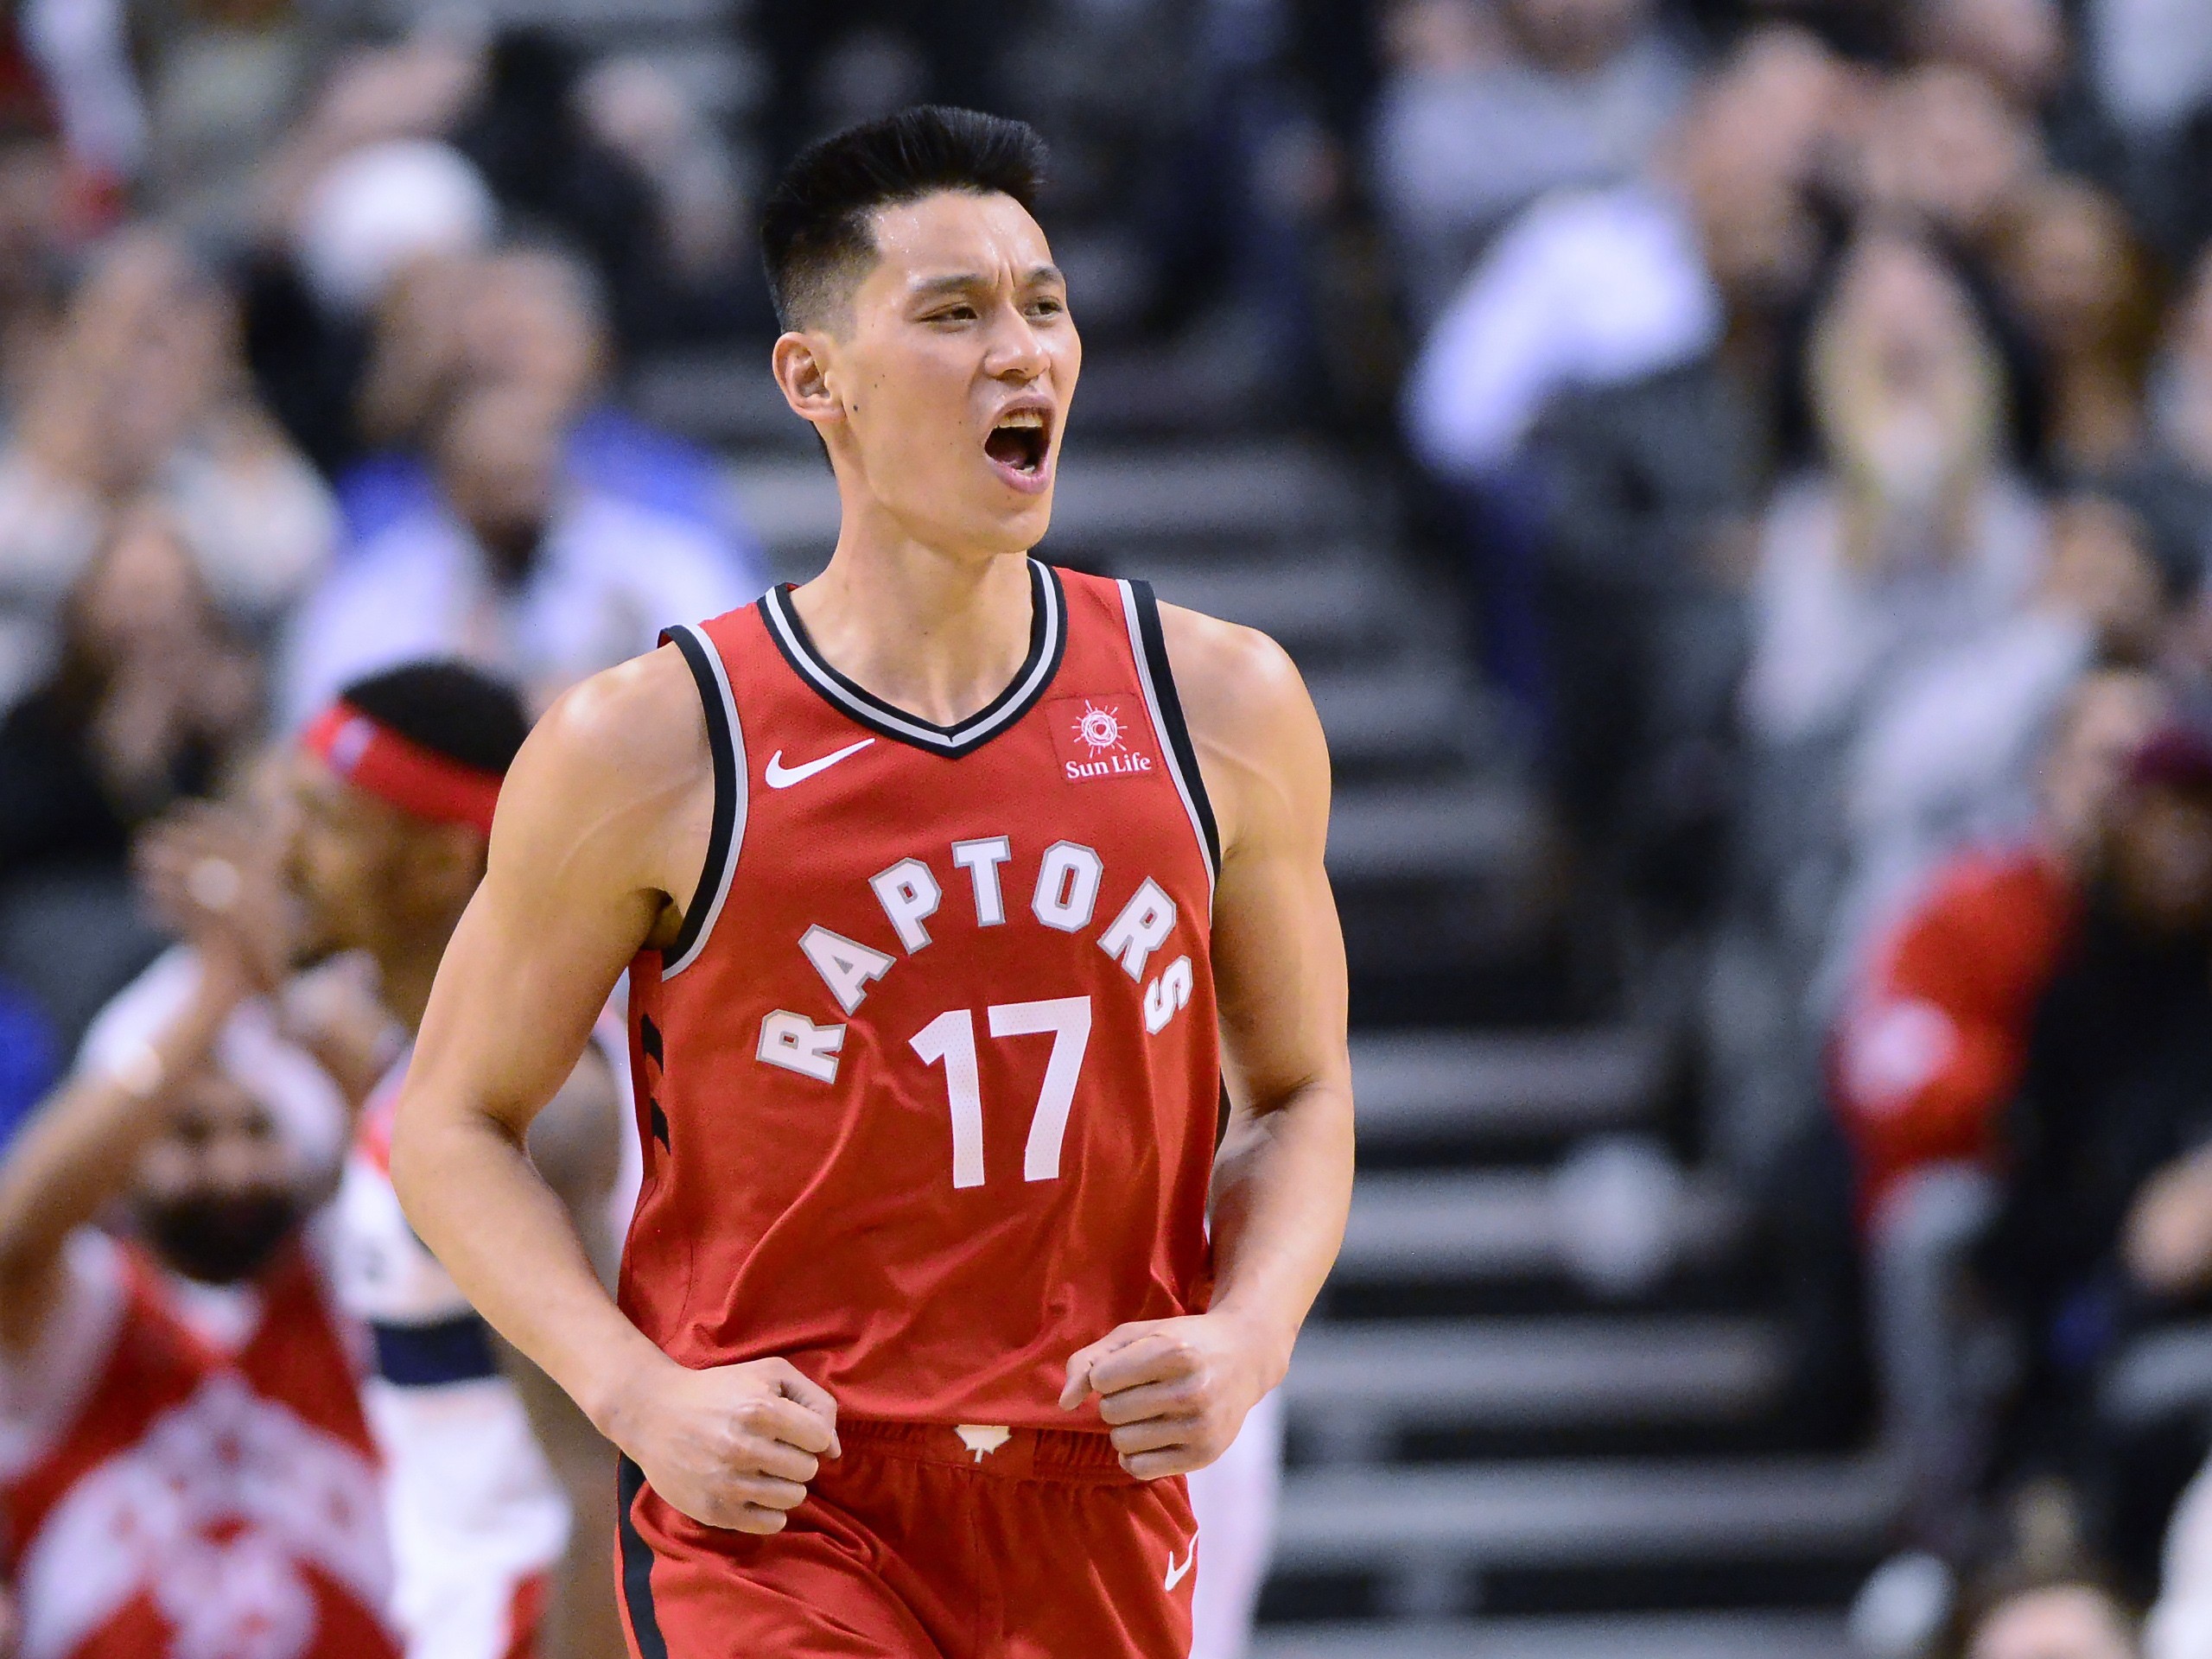 Jeremy Lin not the first Asian player to win the NBA – inside the